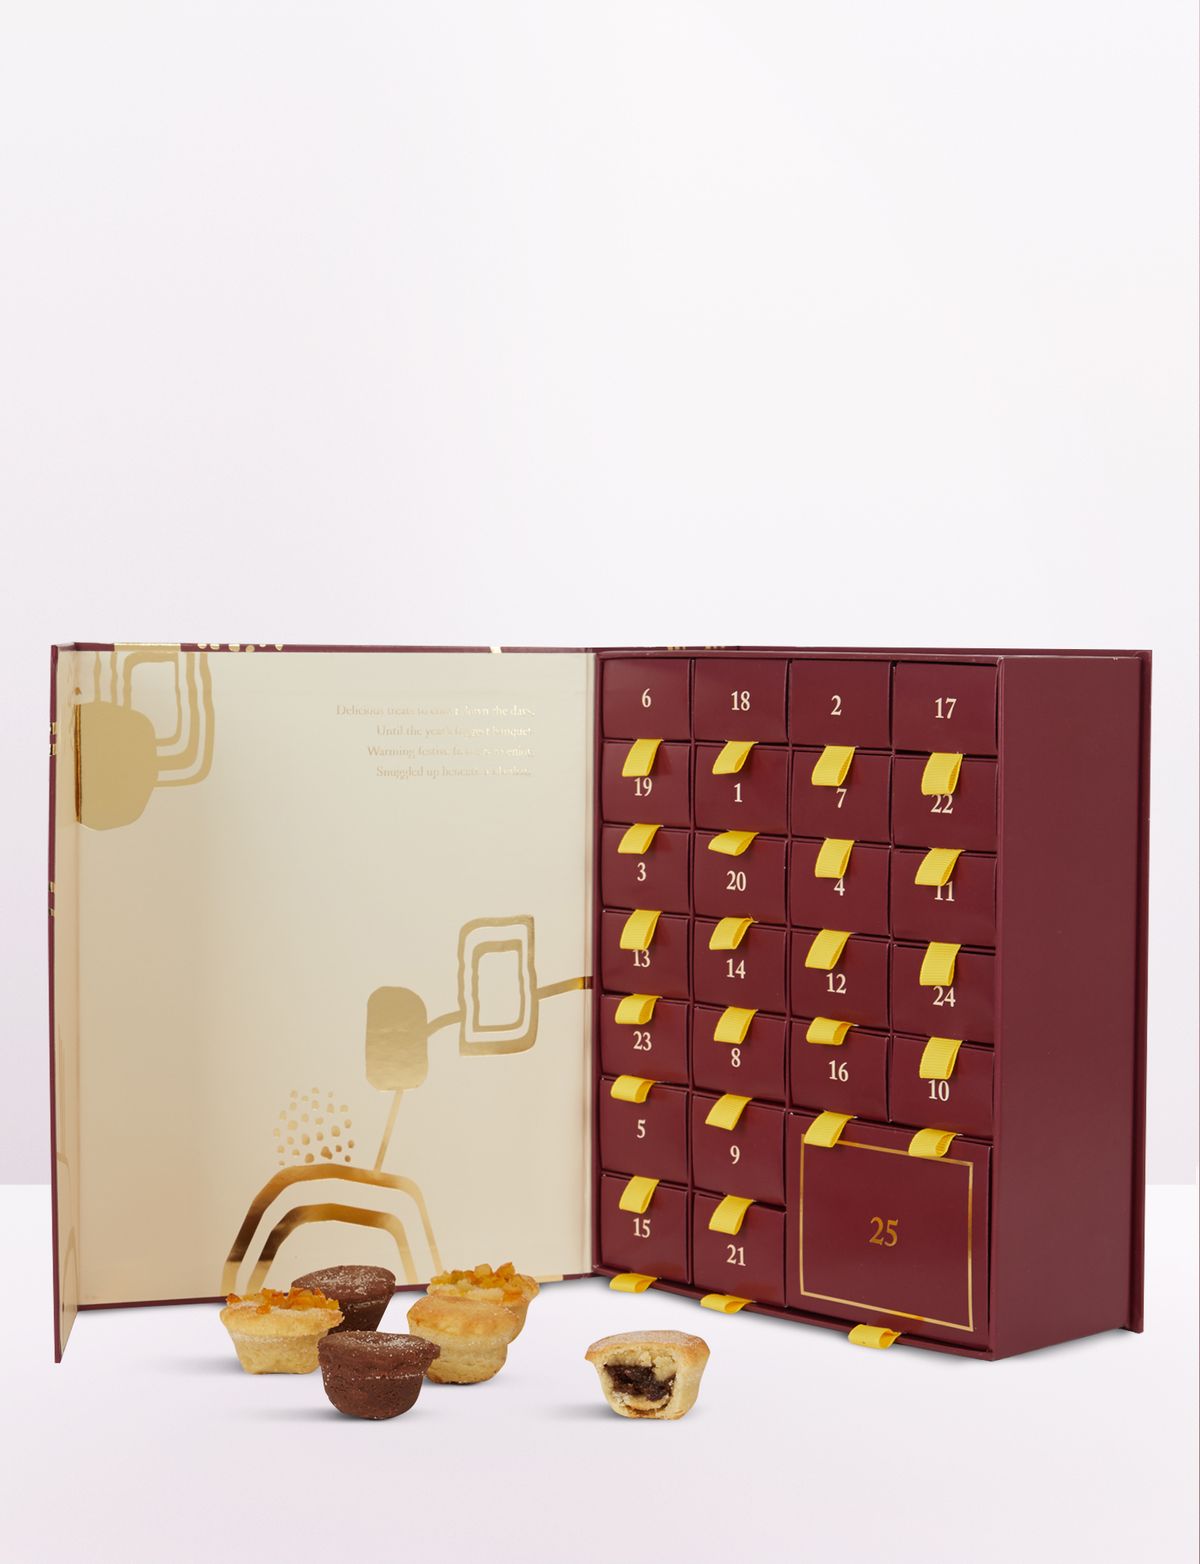 Selfridges new advent calendar is the perfect treat for mince pie